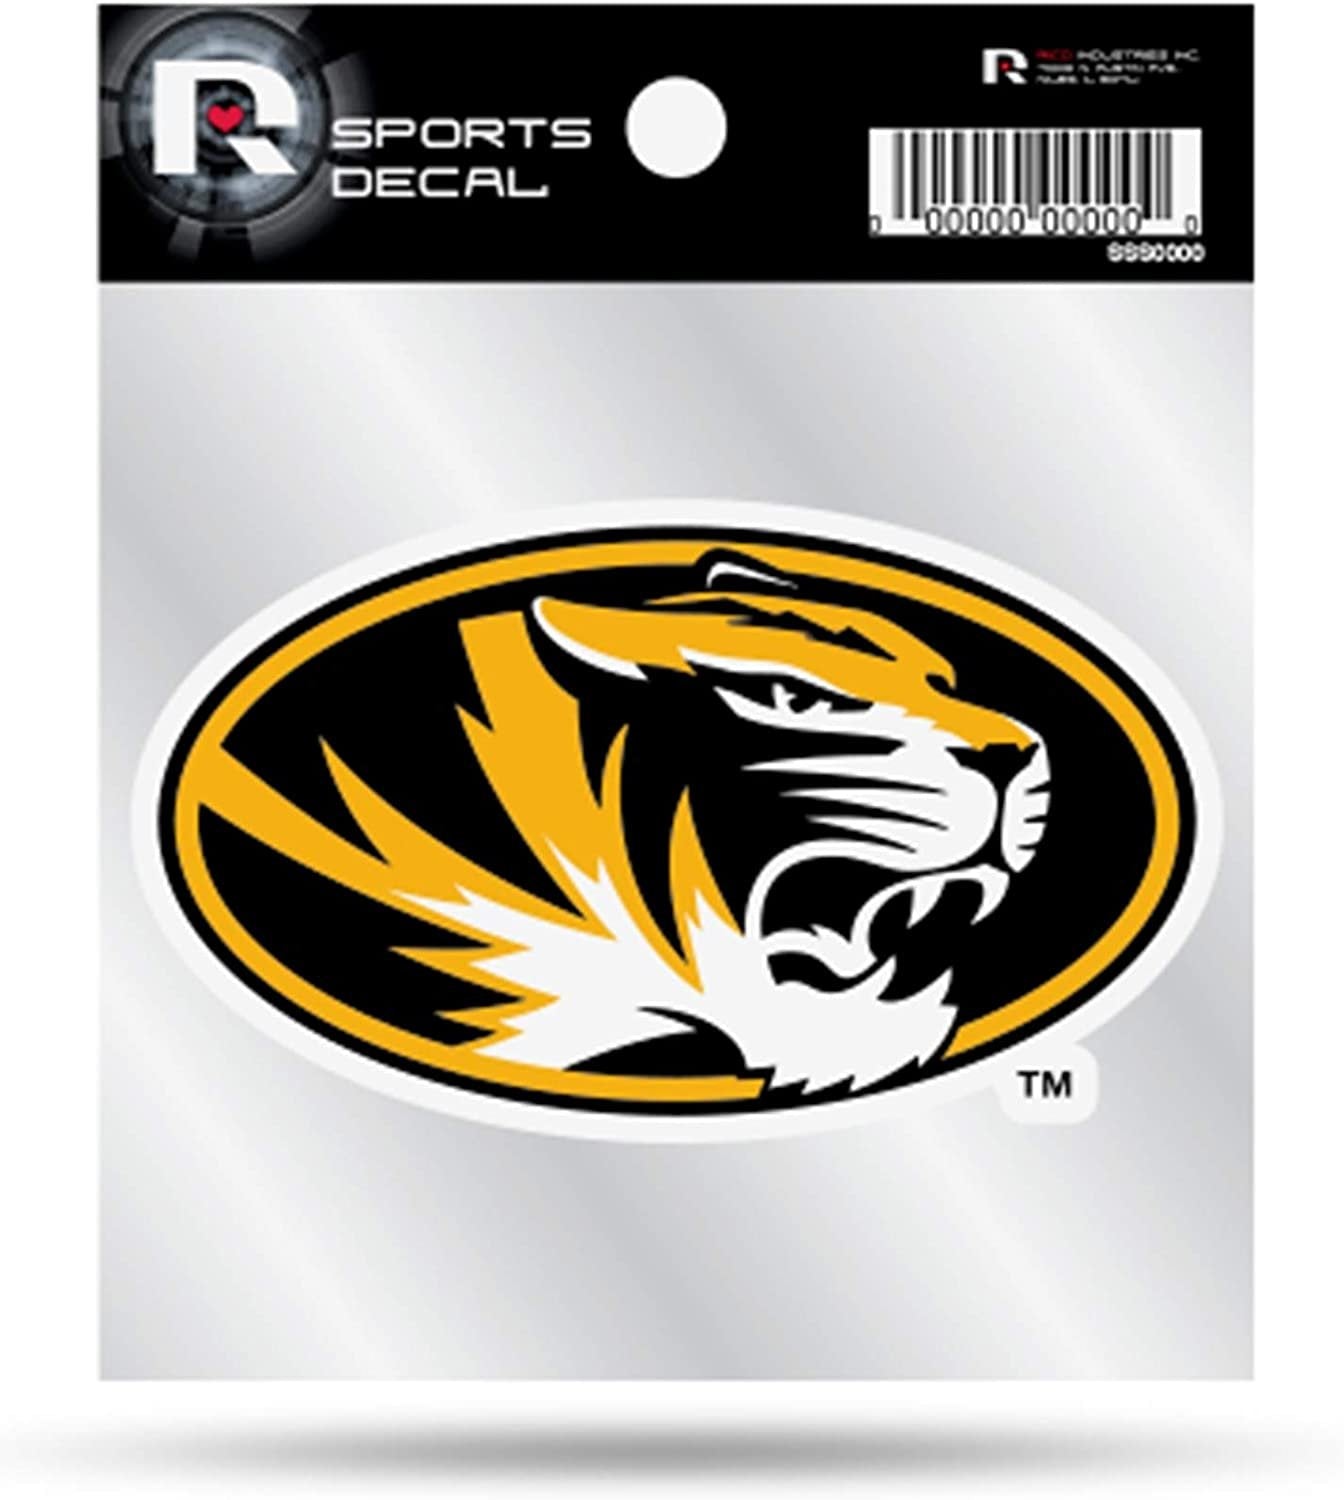 Missouri Tigers Premium 4x4 Decal with Clear Backing Flat Vinyl Auto Home Sticker University of